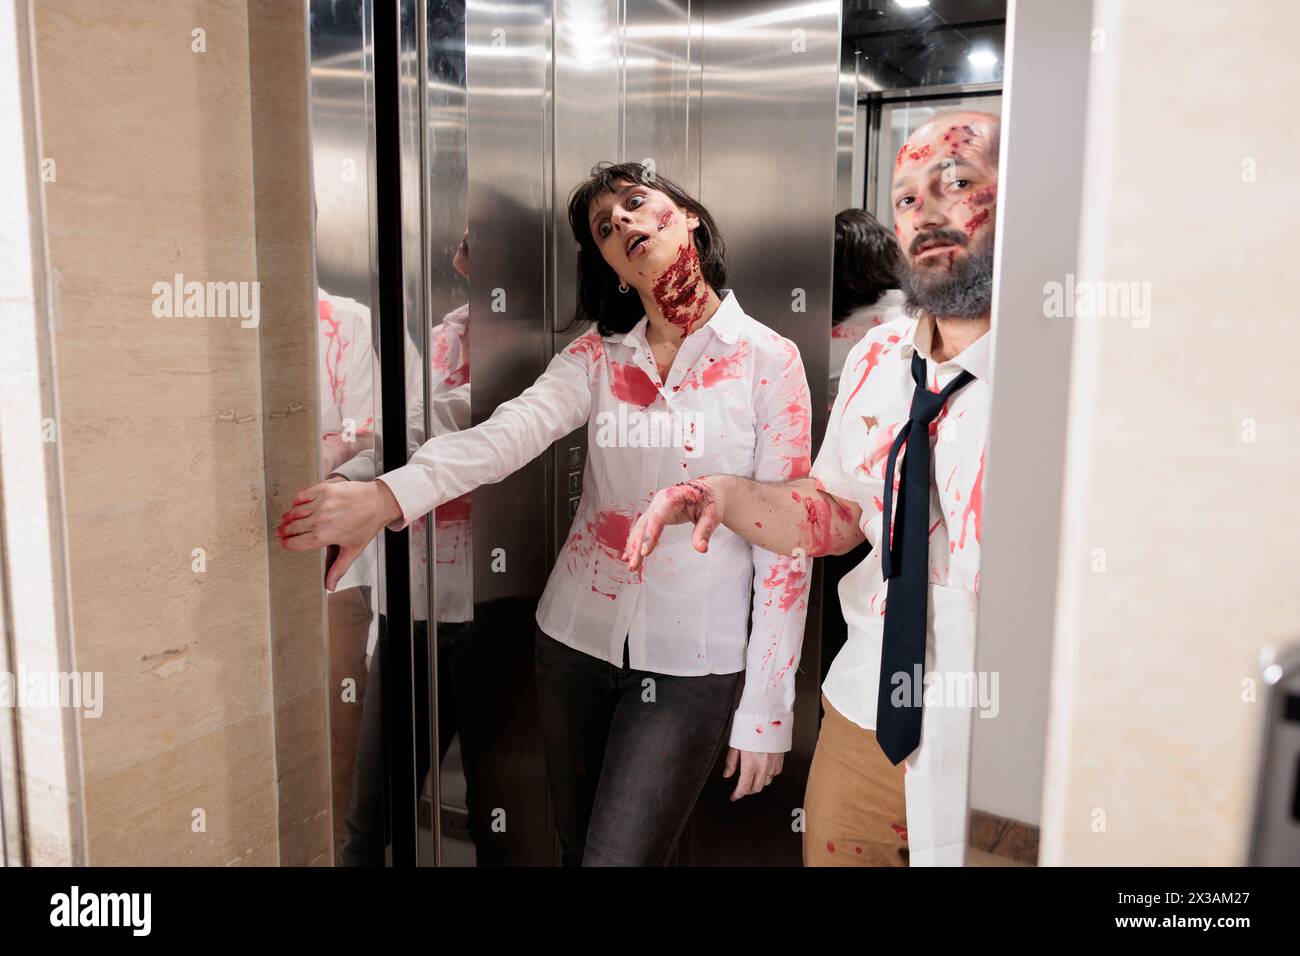 Workers coming out of office building elevator dressed as creepy zombies during Halloween holiday. Colleagues covered in fake scars pretending to be feral cadavers exiting escalator Stock Photo